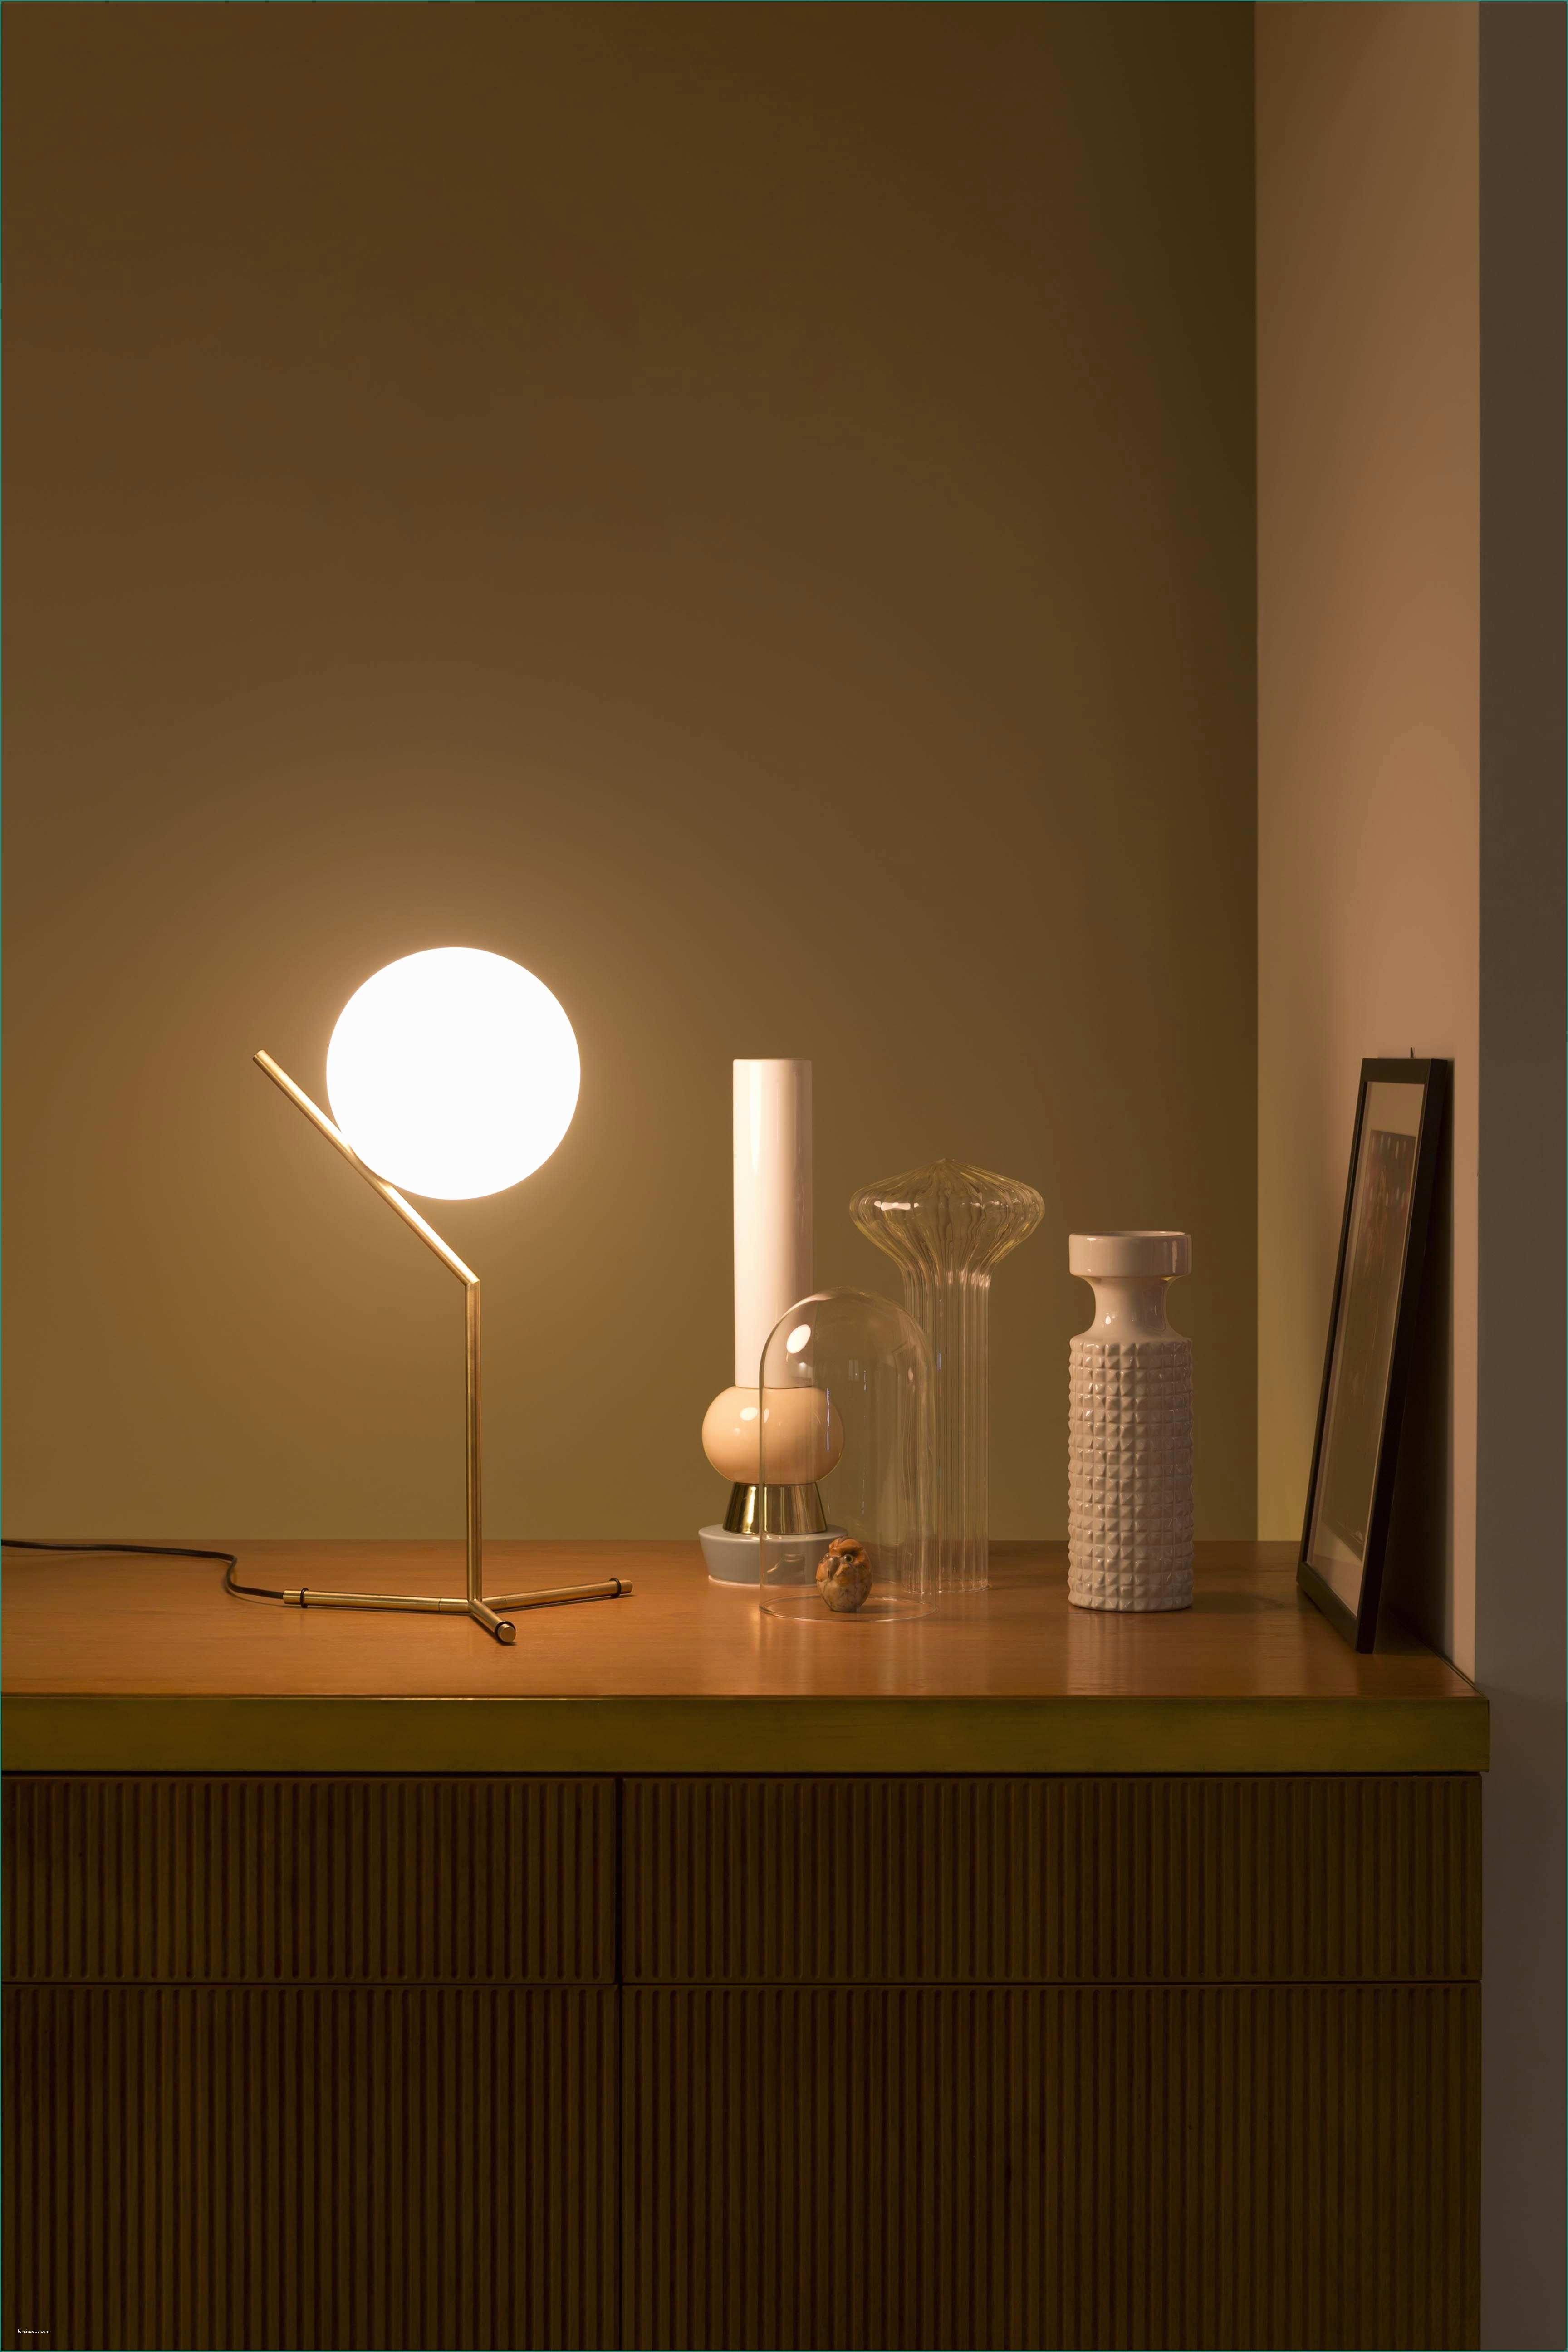 Glo Ball Flos E Ic Light T1 High Brass Designed by Michael Anastassiades for Flos